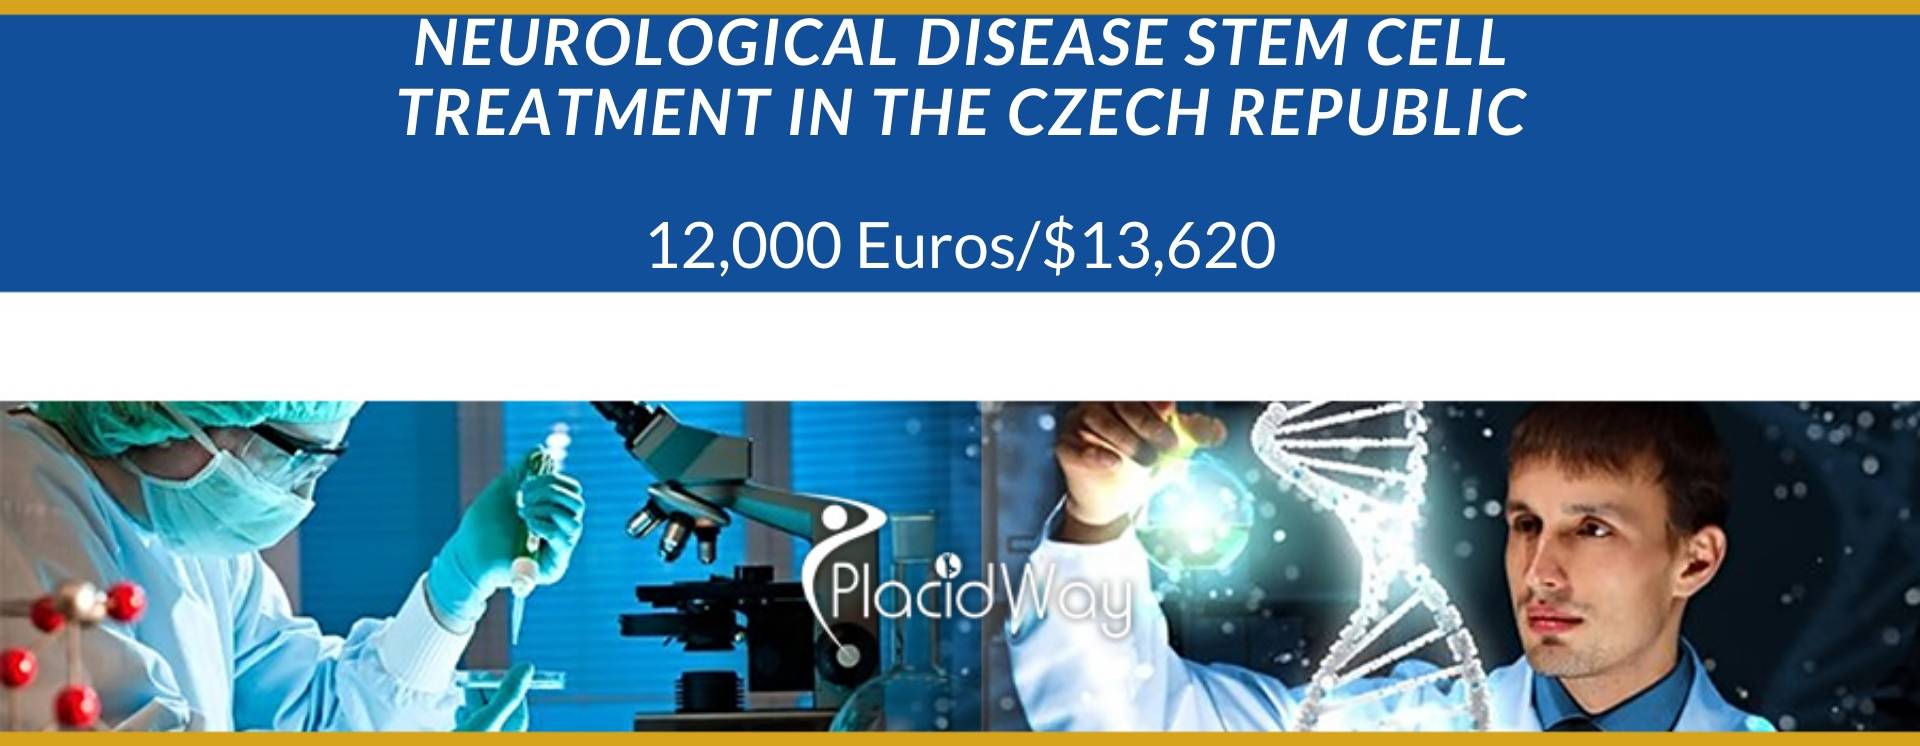 Stem Cell Therapy for Neurological Diseases in the Czech Republic